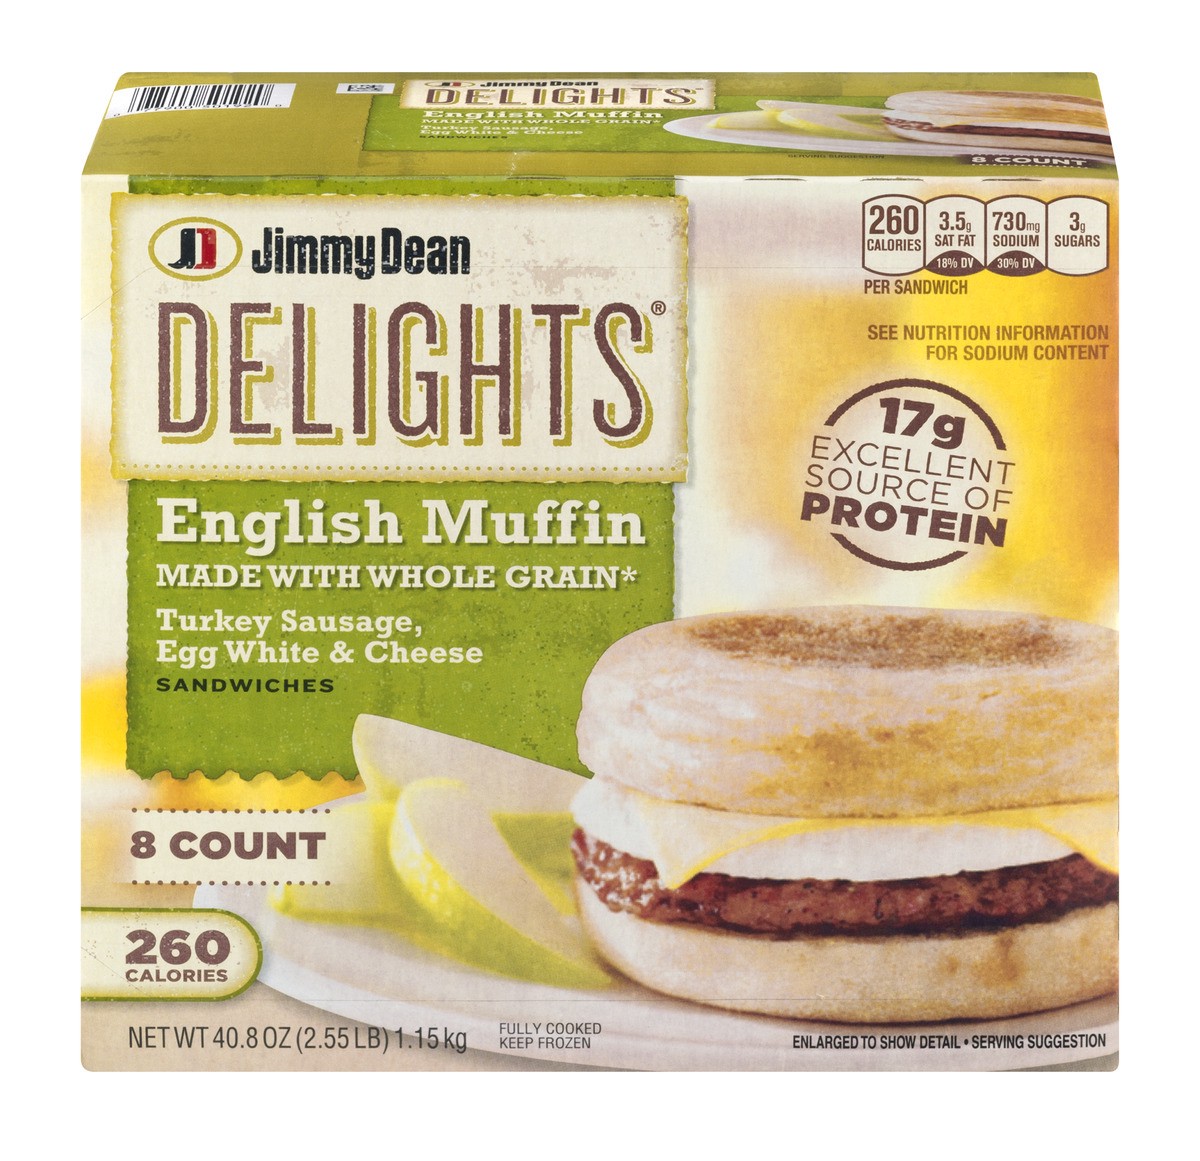 slide 1 of 9, Jimmy Dean Delights English Muffin Breakfast Sandwiches with Turkey Sausage, Egg White, and Cheese, Frozen, 8 Count, 1.16 kg